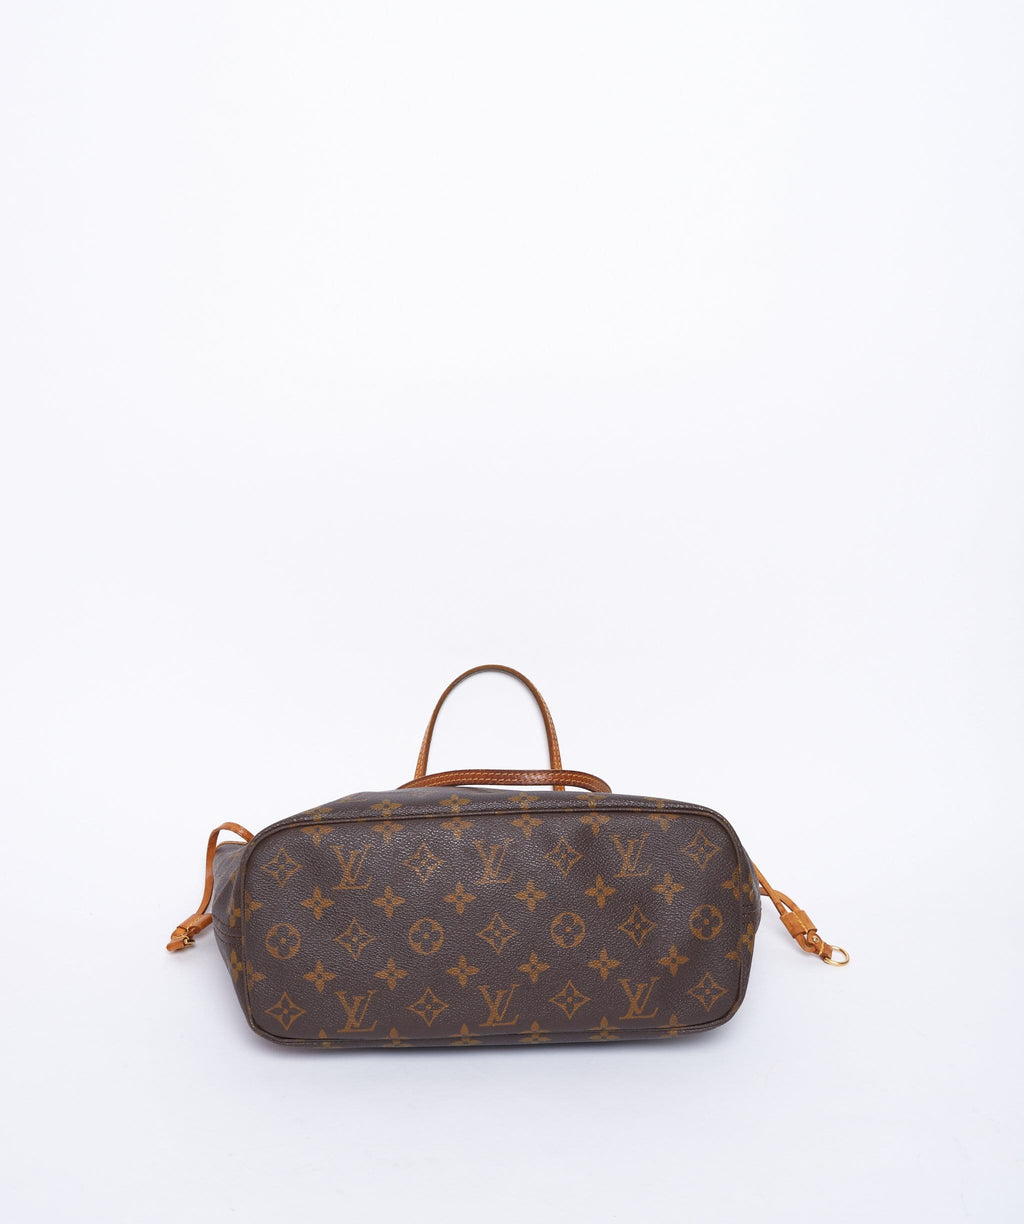 Louis Vuitton Monogram Canvas Neverfull PM Tote Bag – I MISS YOU